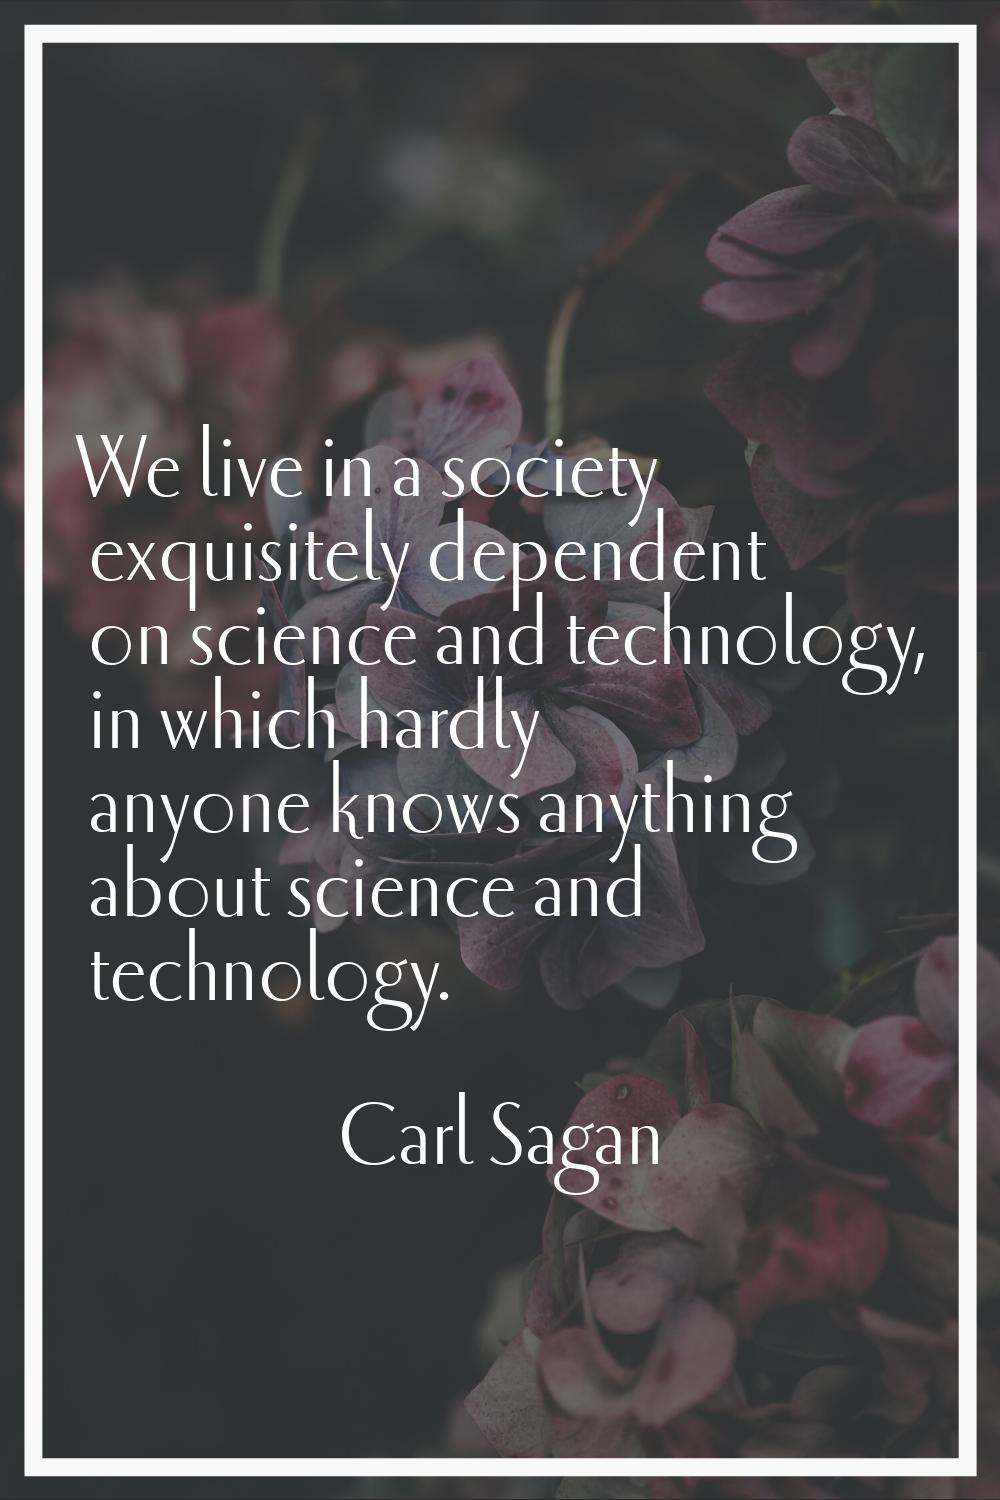 We live in a society exquisitely dependent on science and technology, in which hardly anyone knows 